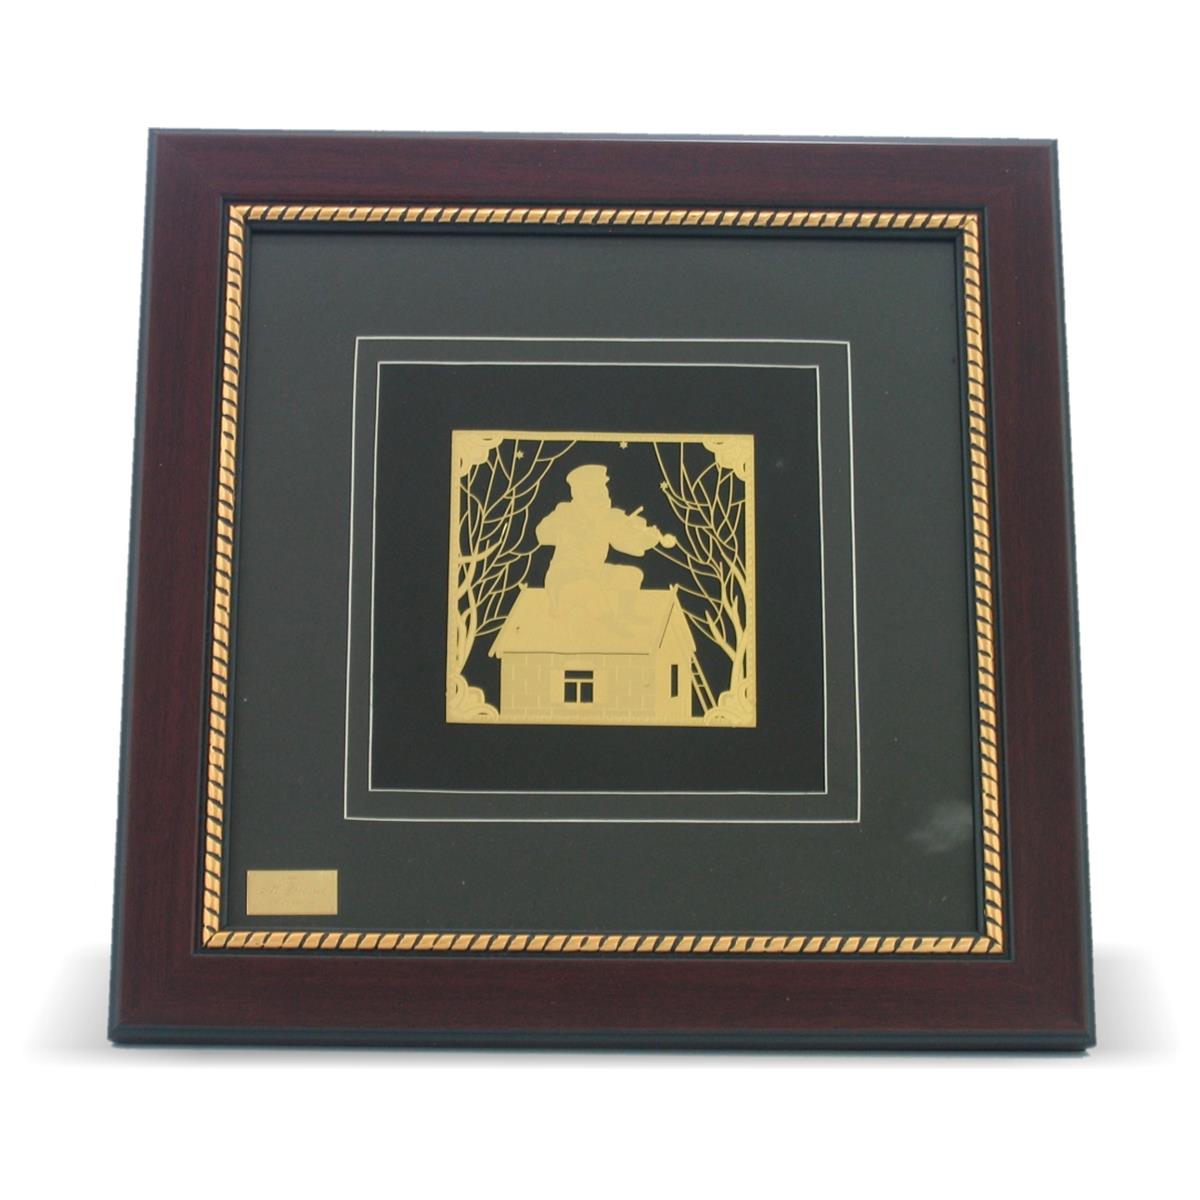 A&m Judaica And Gifts 85530 32 X 32 Cm Golden Plate Blessing Board In Glass Frame Fiddler On The Roof